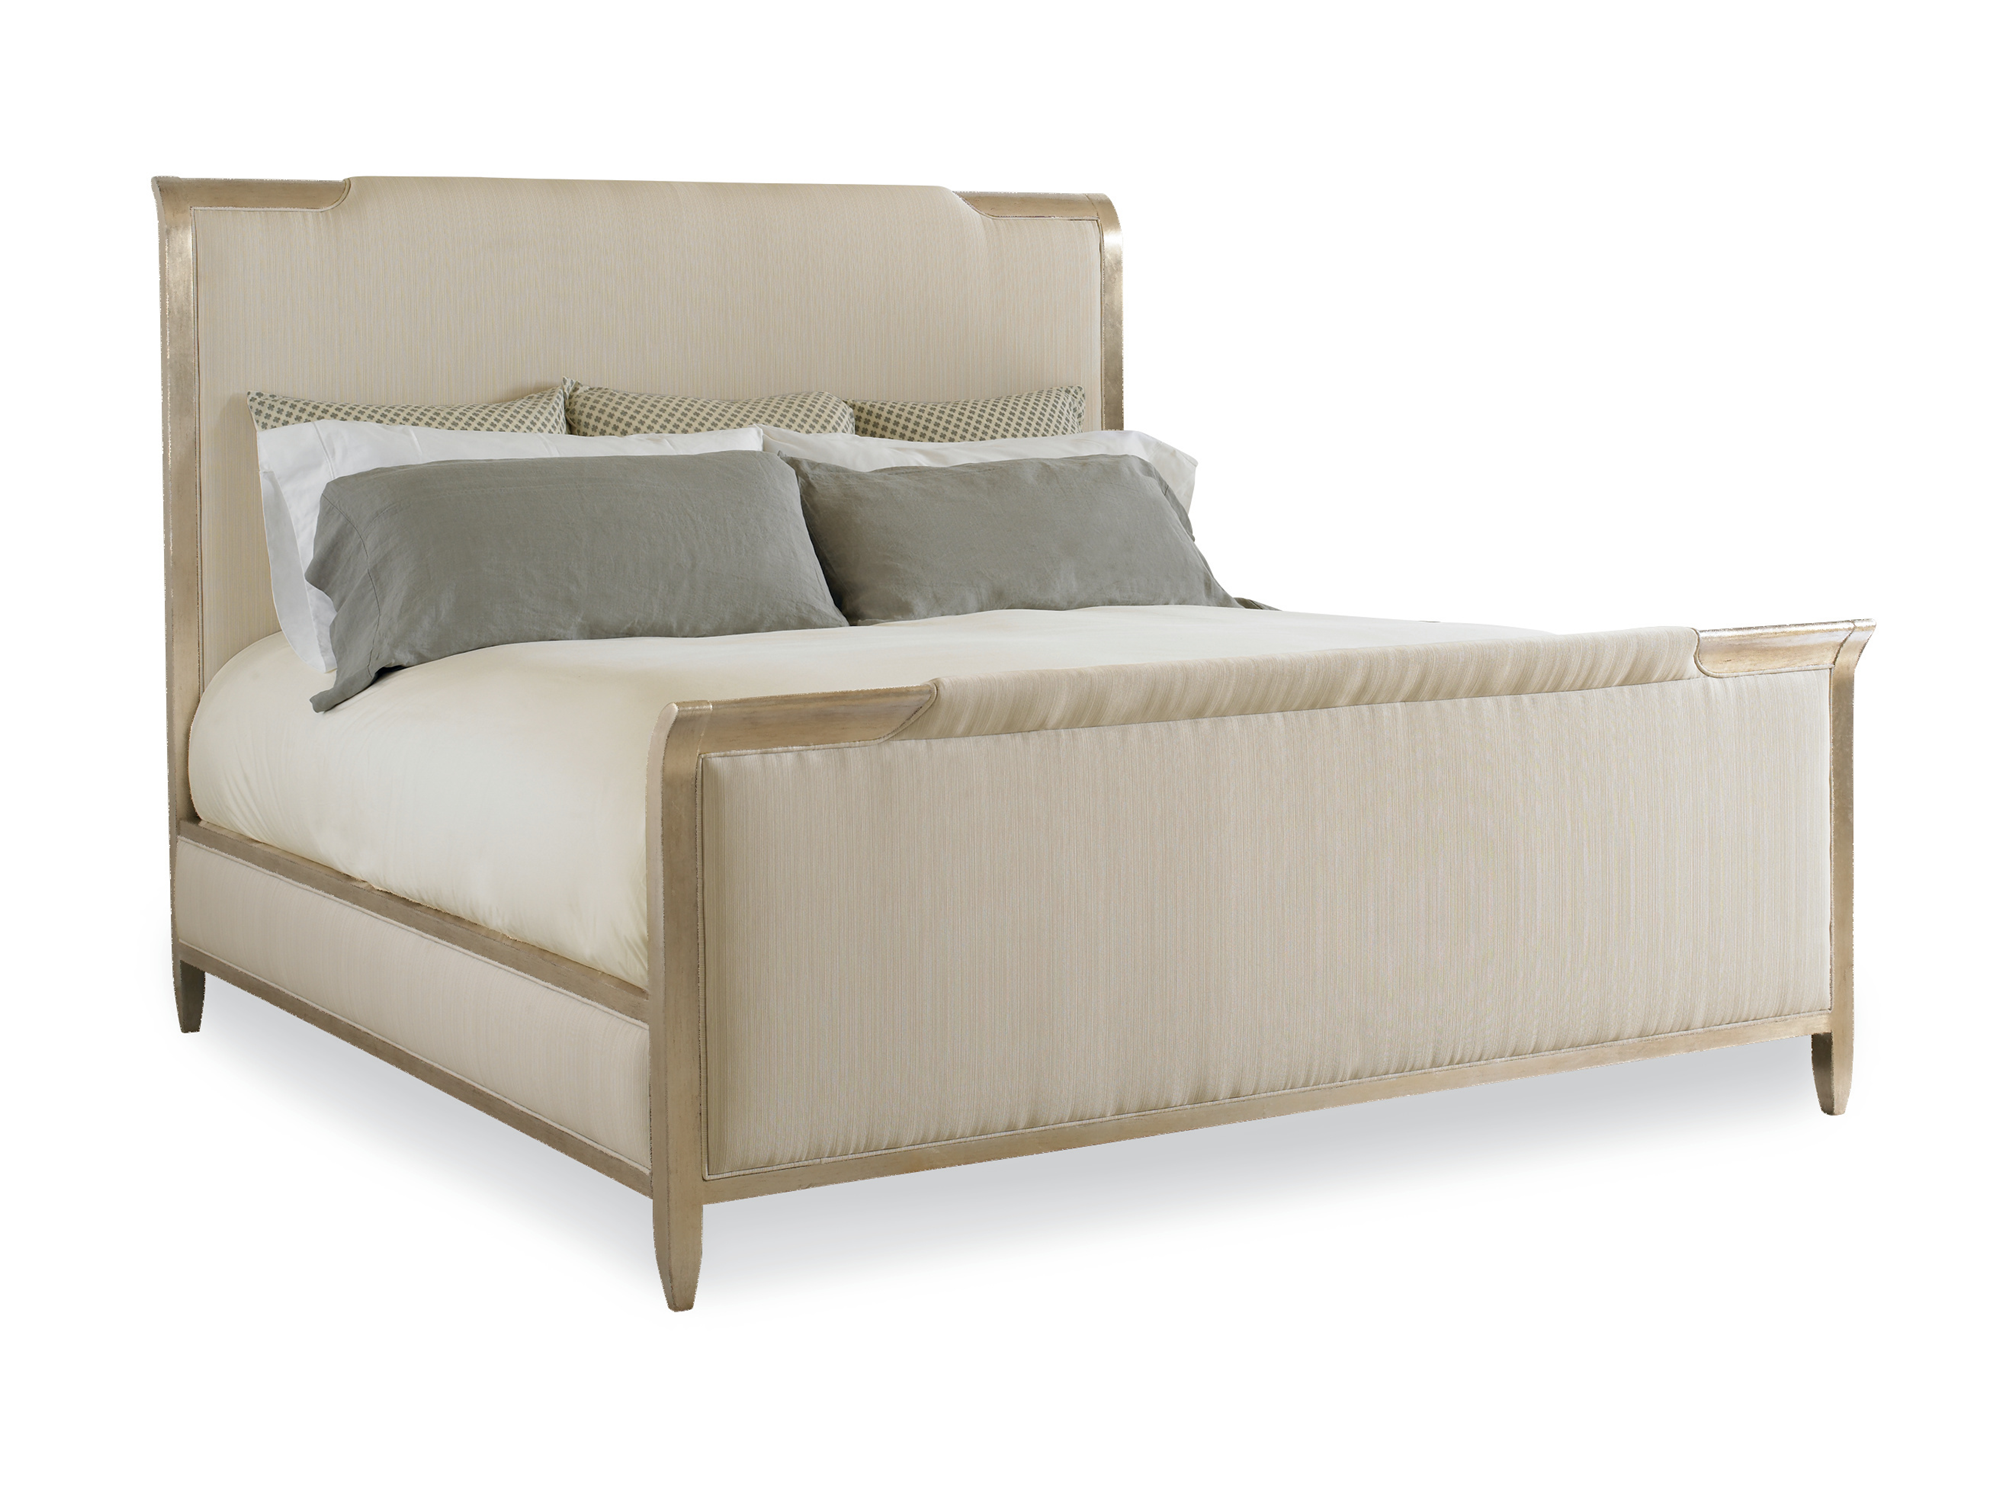 Babs Nite in Shining Armor King Bed in Pompeii - Euro Living Furniture